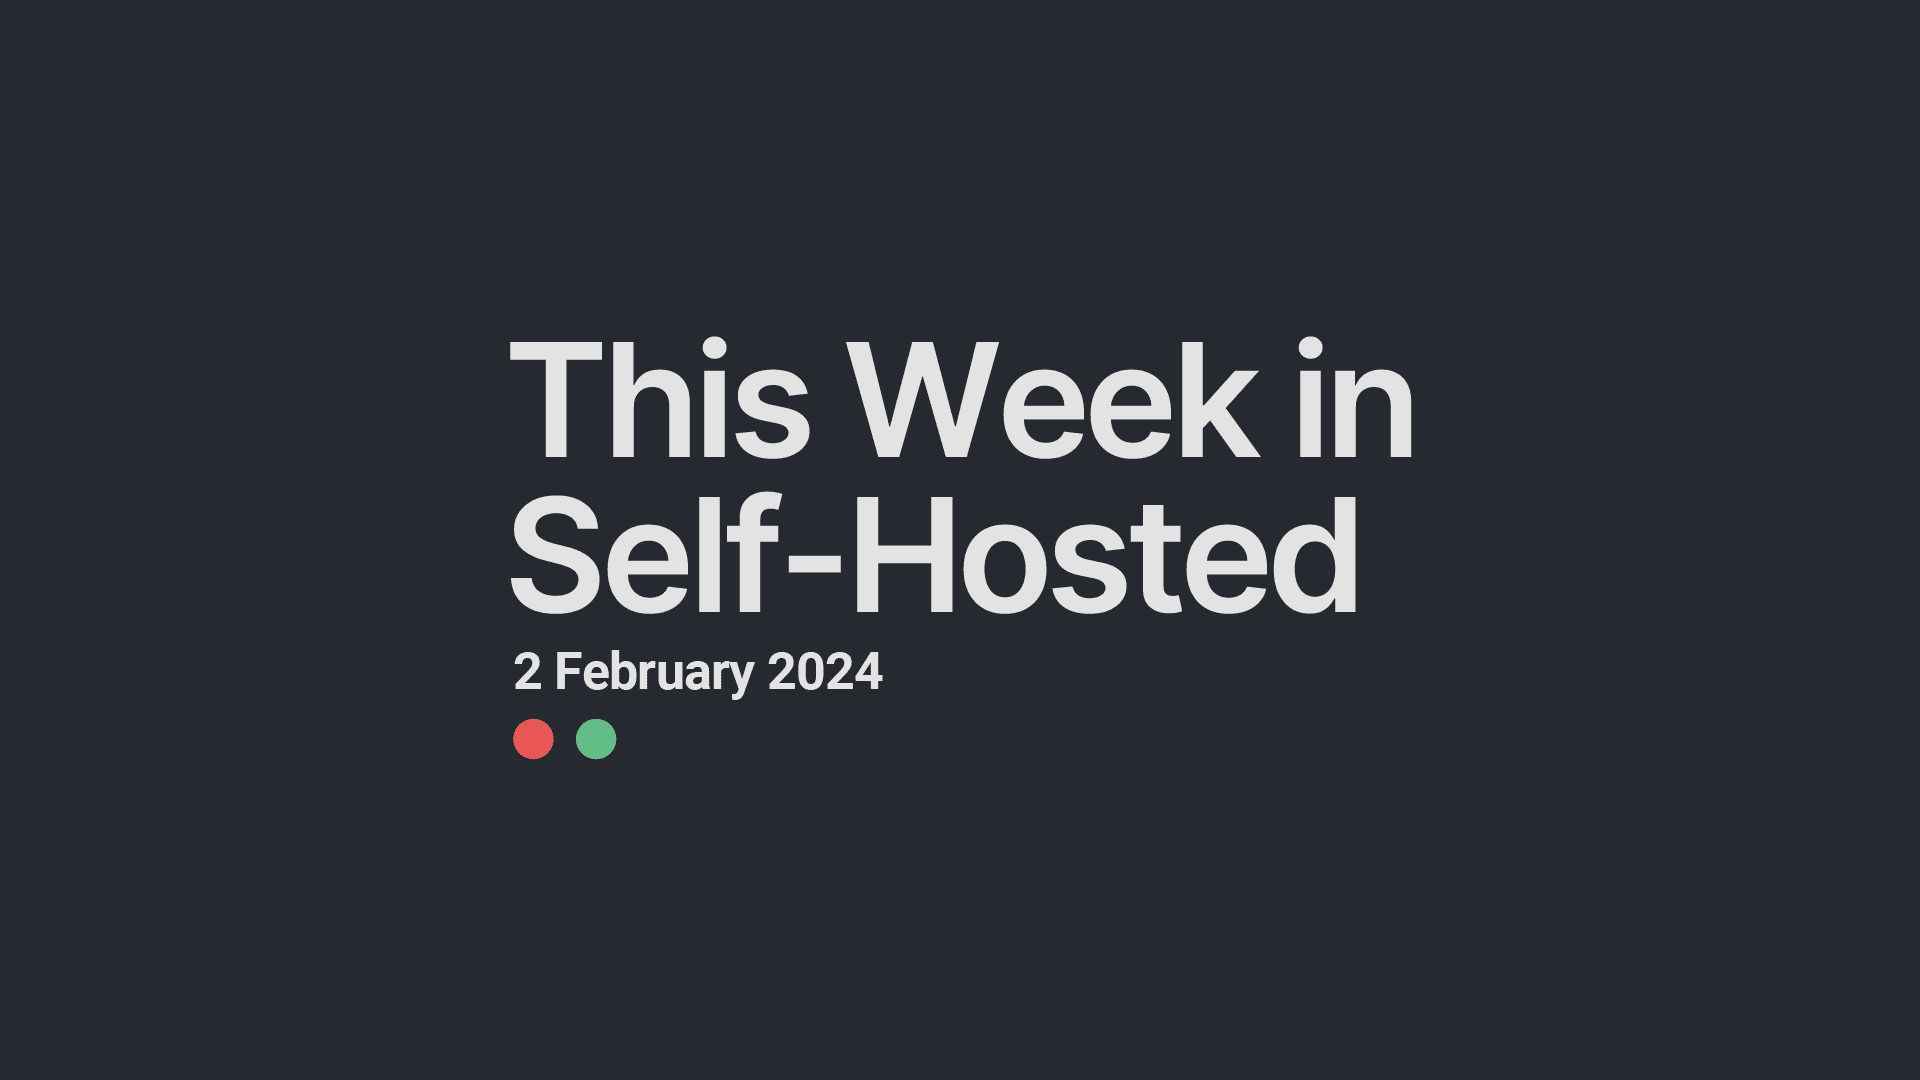 This Week in Self-Hosted (2 February 2024)